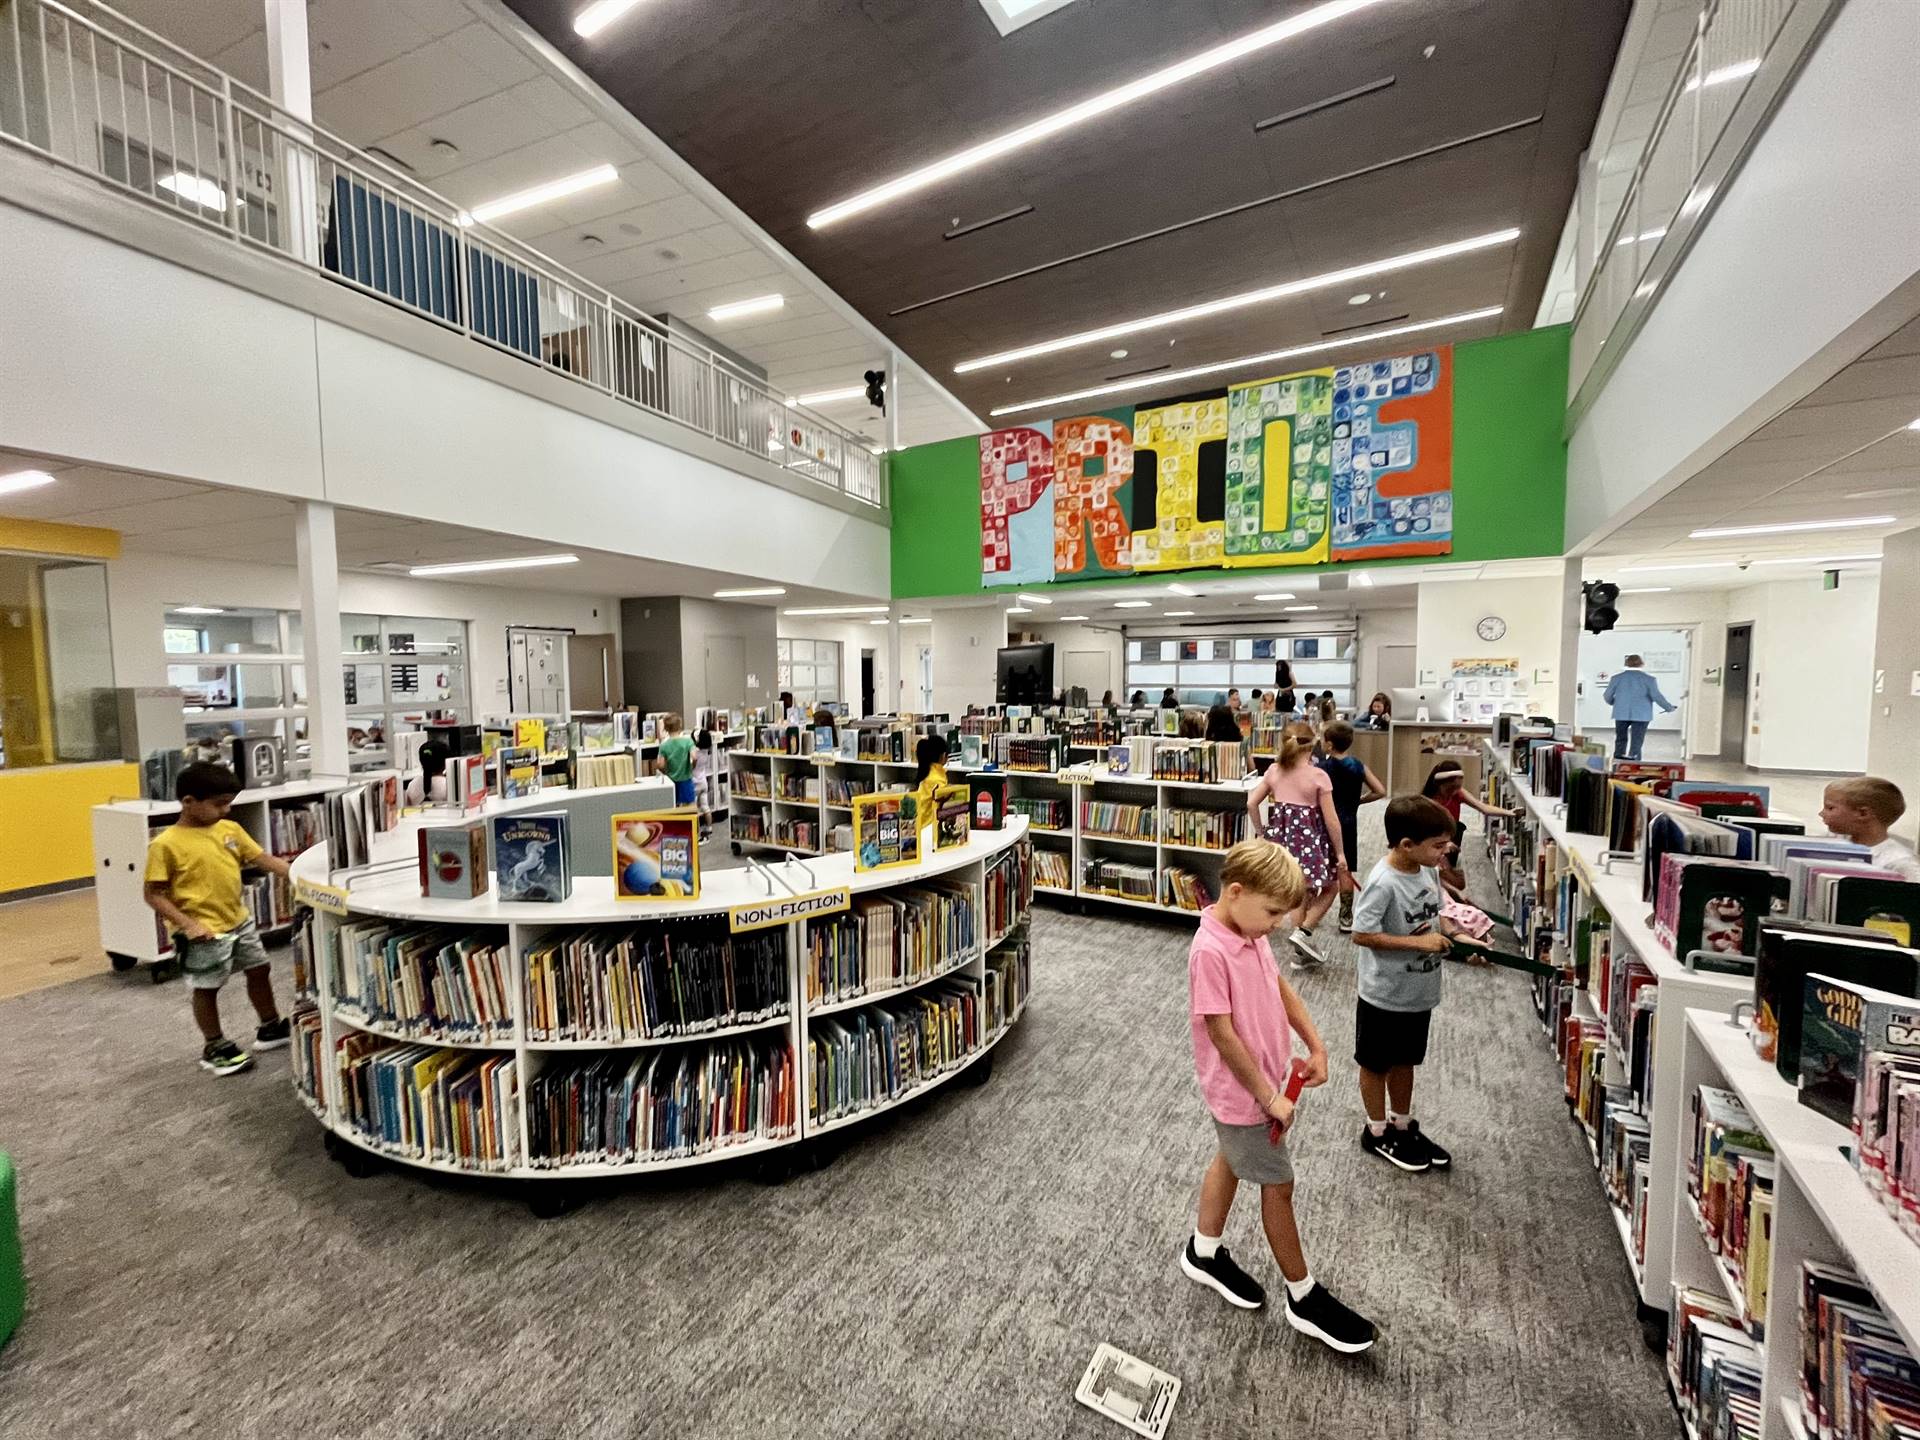 An image of the media center, with shelves of books and children perusing the shelves